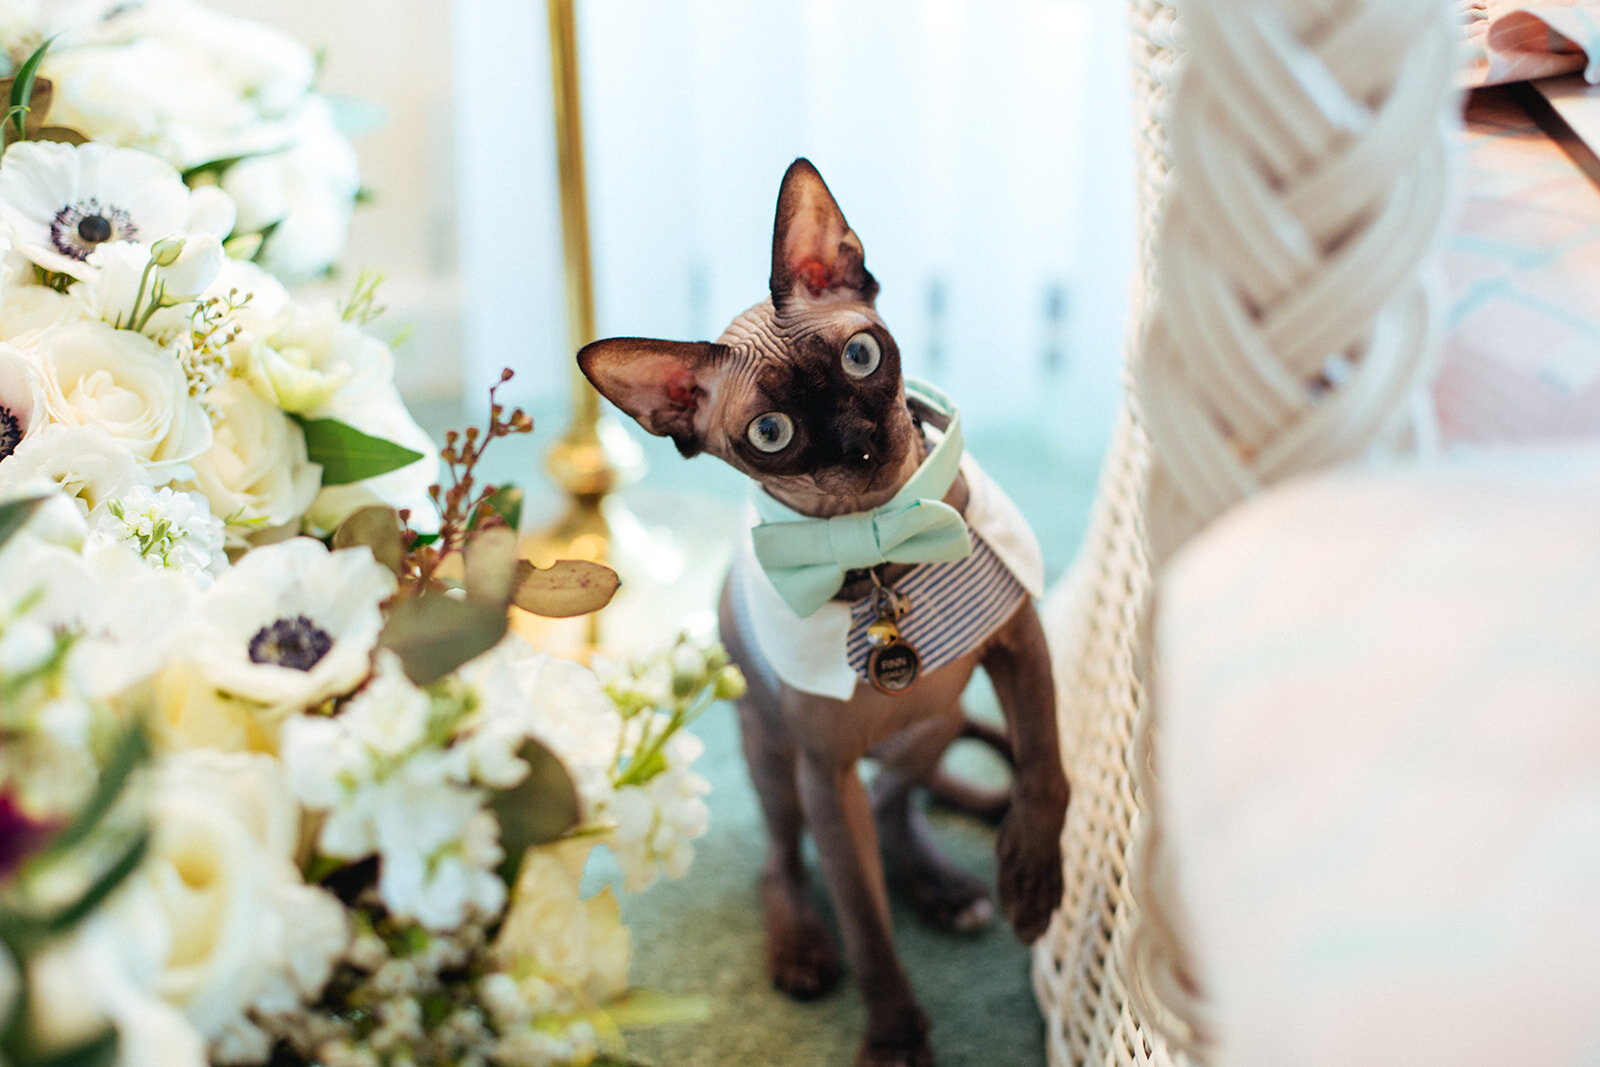 Hairless cat with bowtie Annapolis MD Shawnee Custalow Queer Wedding Photographer